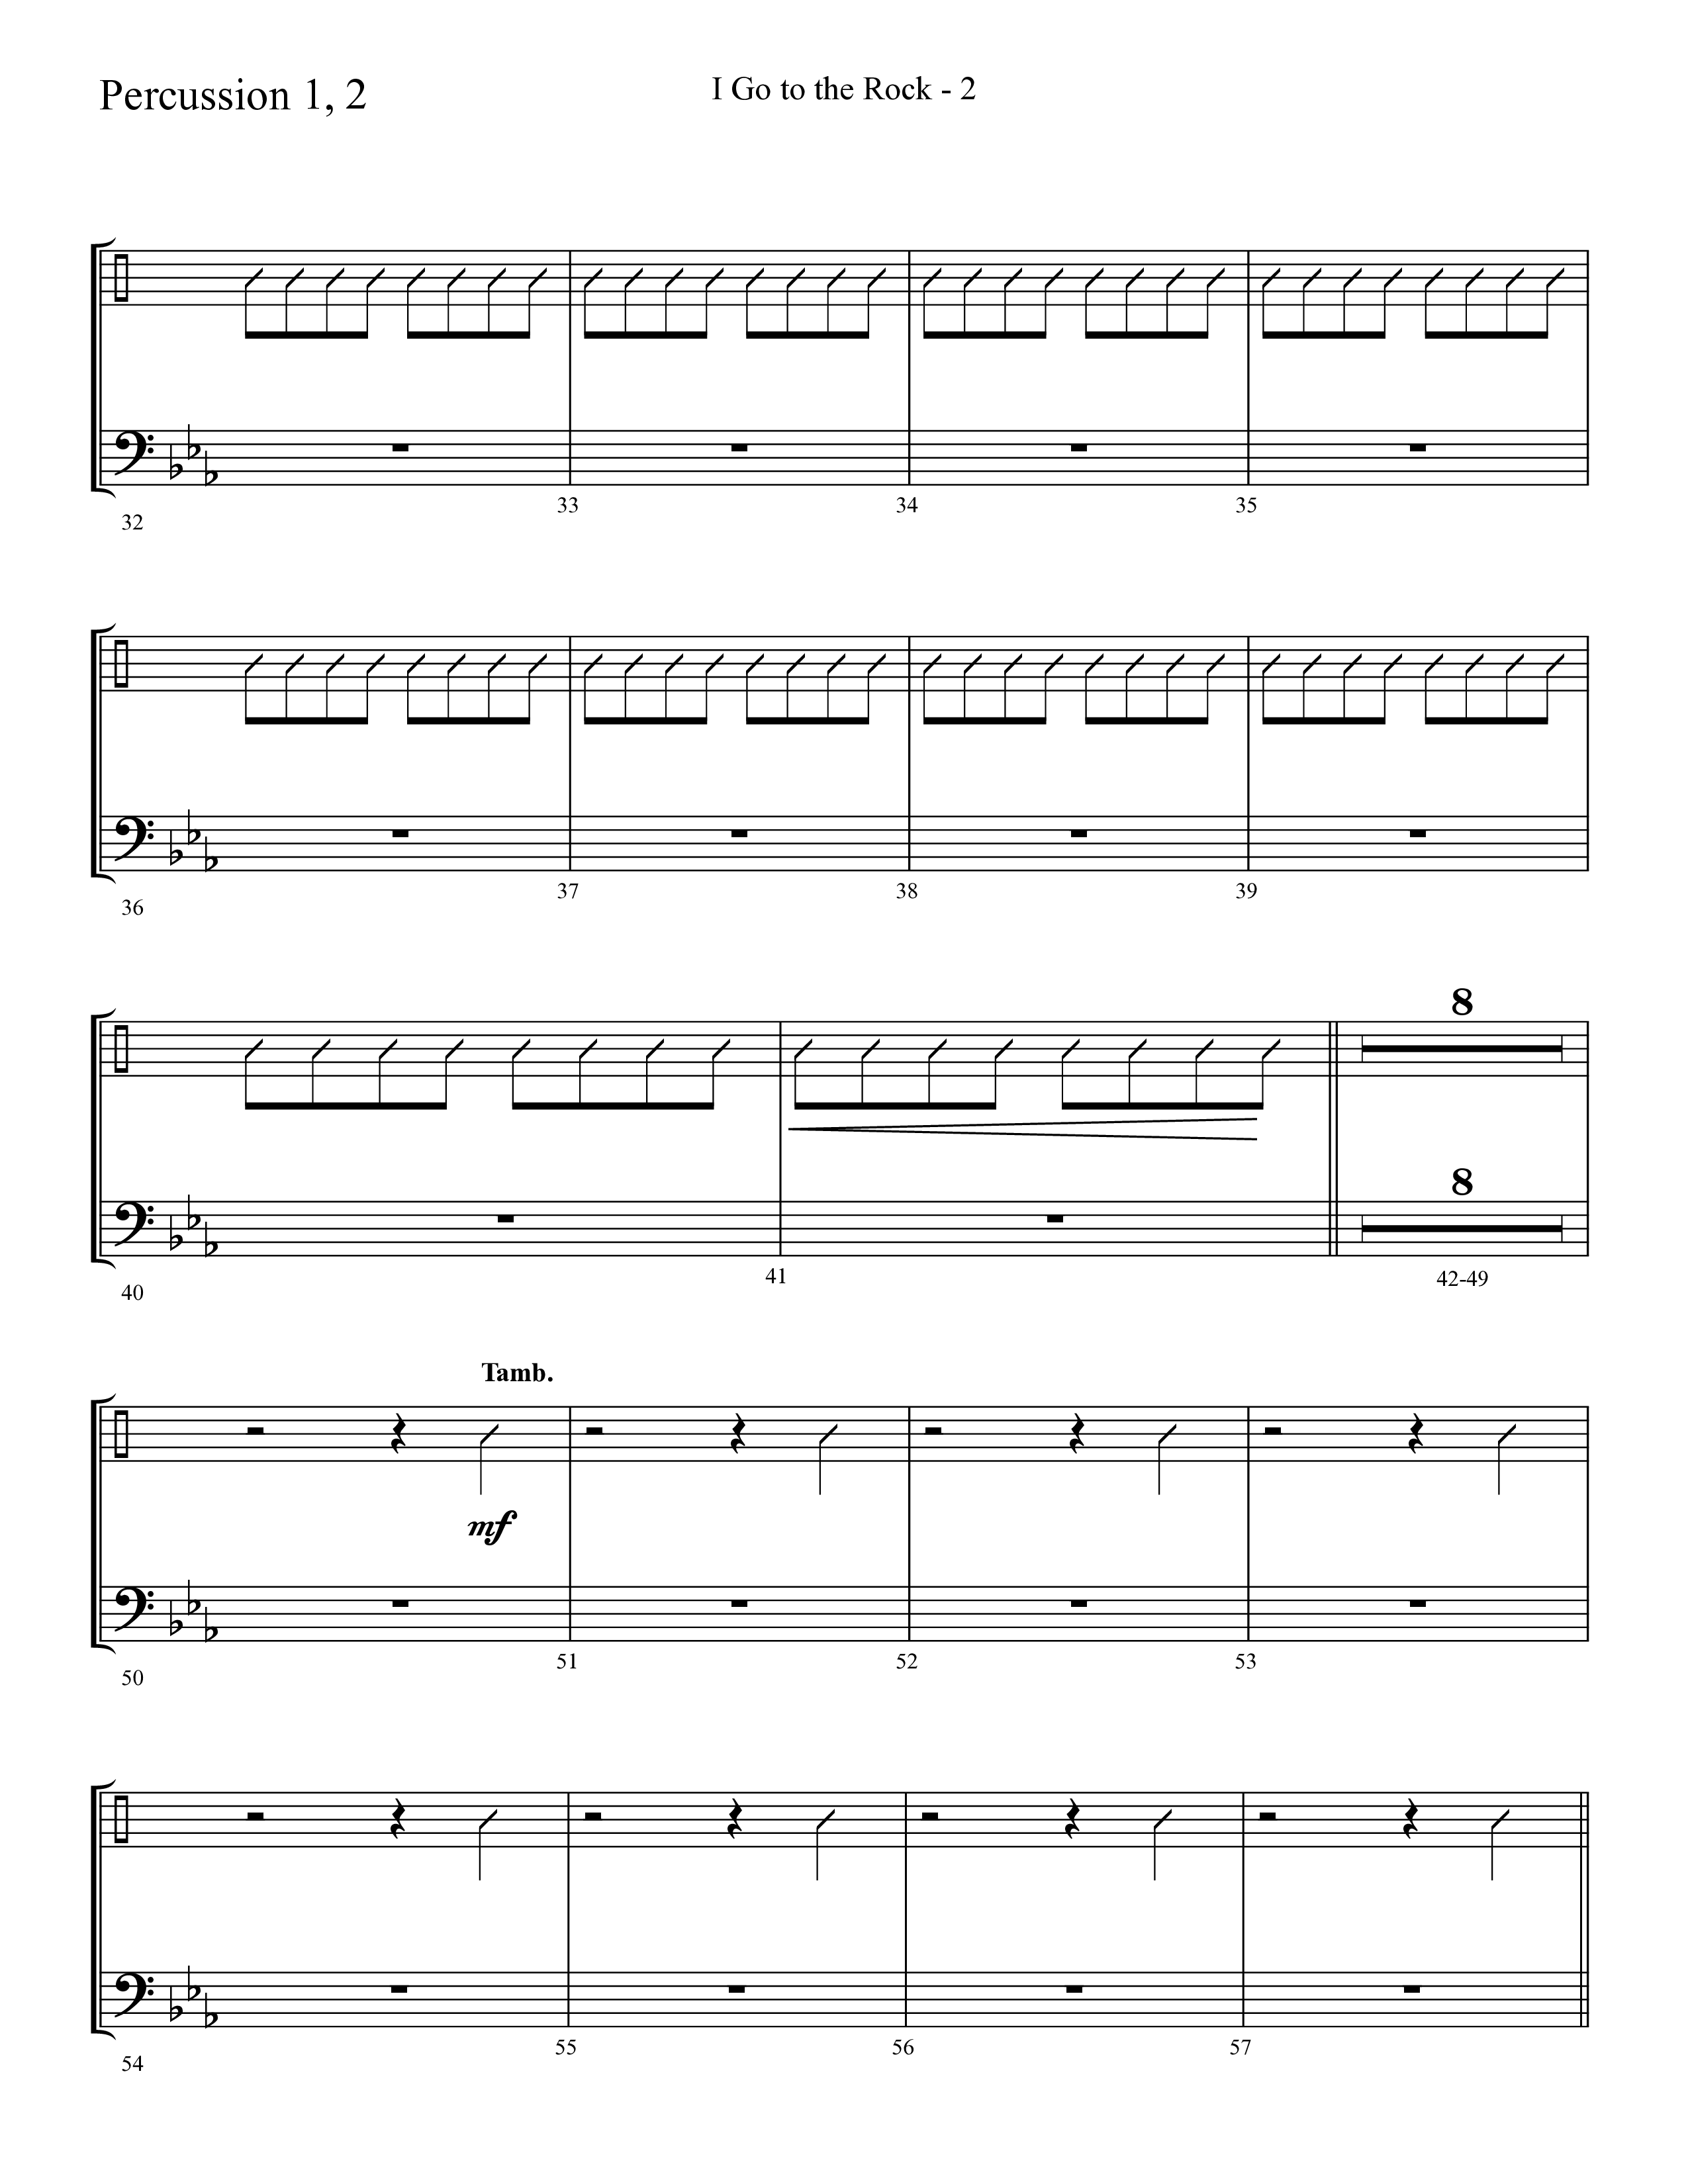 I Go To The Rock (Choral Anthem SATB) Percussion 1/2 (Lifeway Choral / Arr. Cliff Duren)